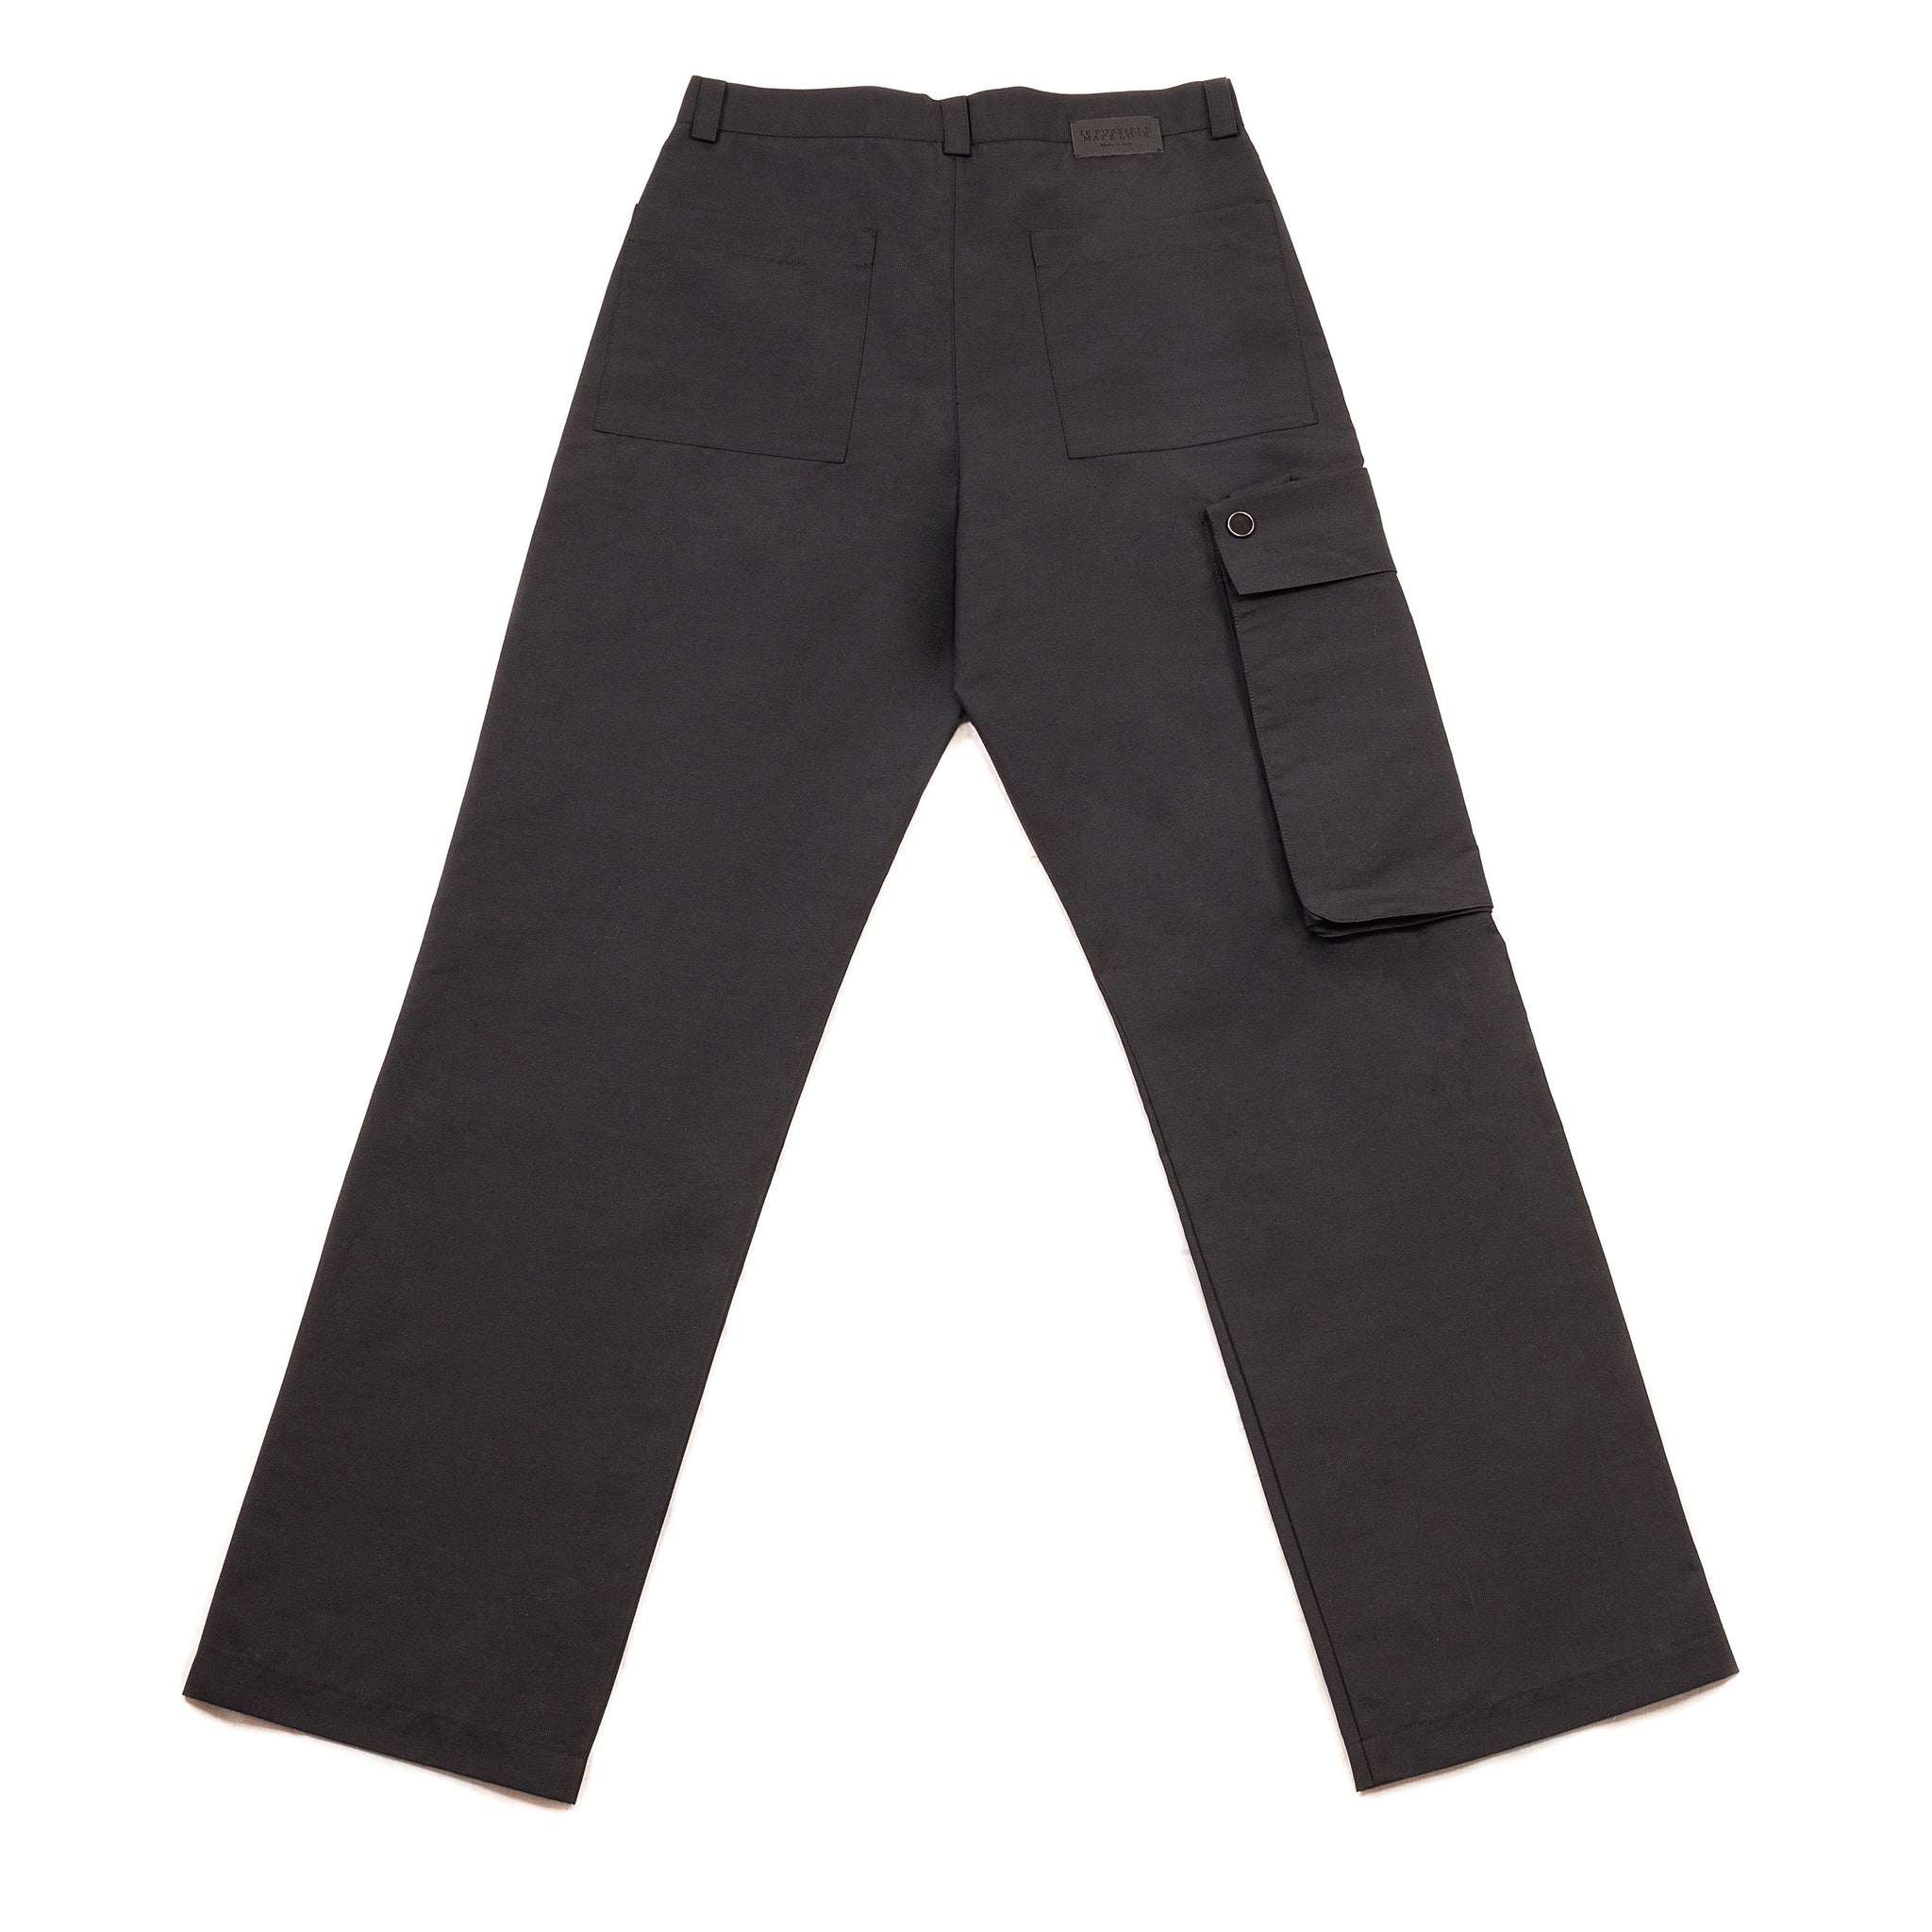 BLACK PANTS CARGO WITH REMOVABLE POCKET